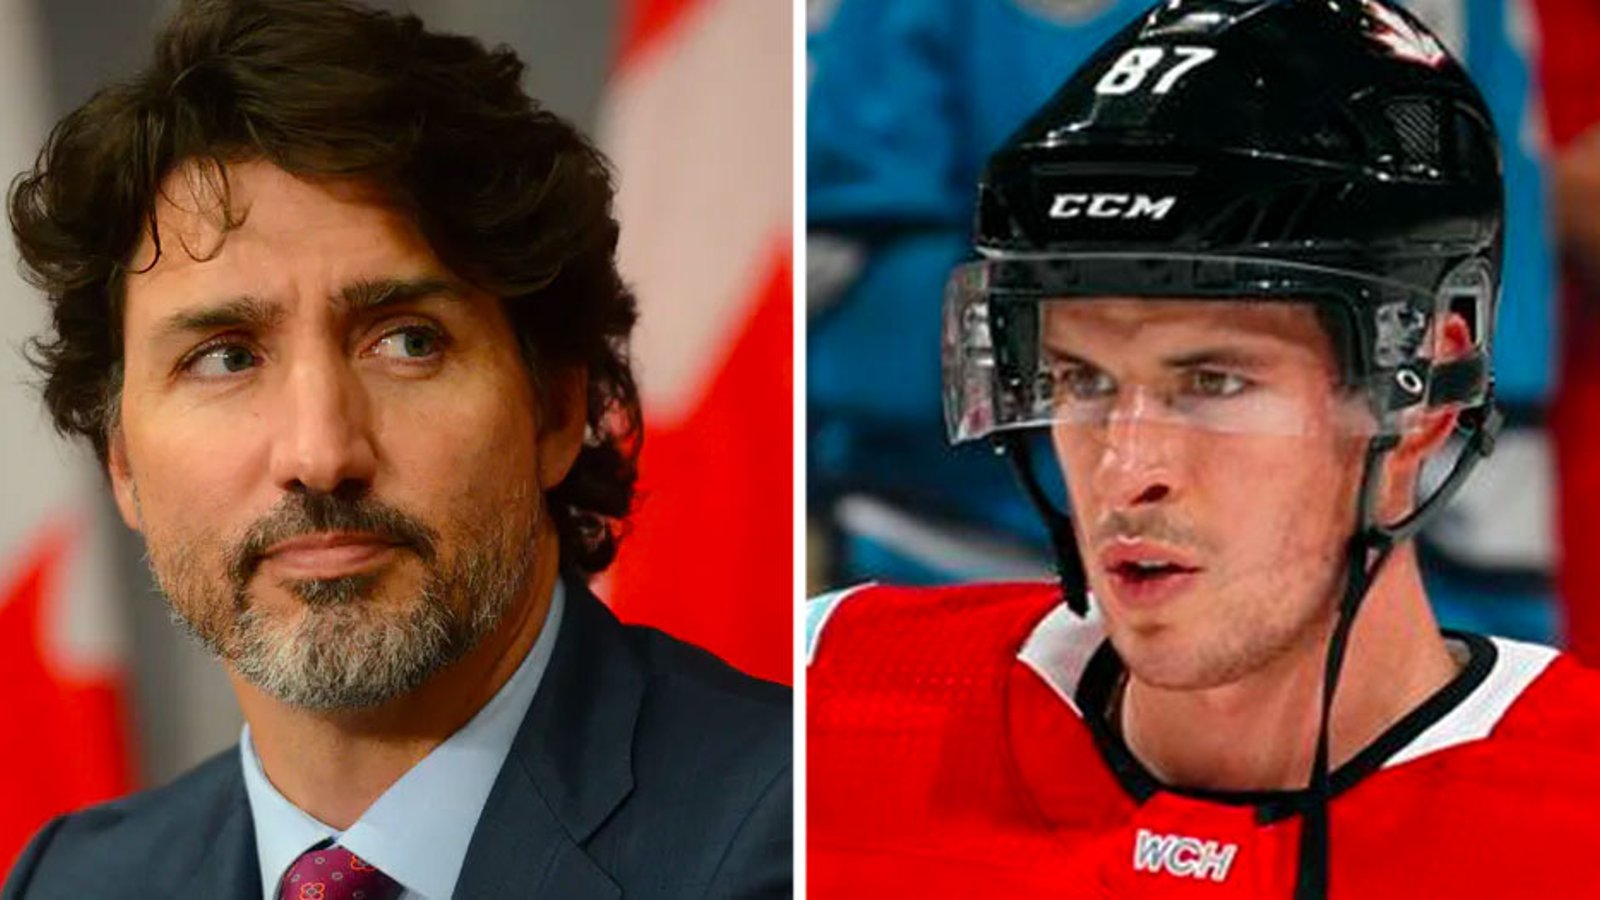 Crosby and Trudeau both give their thoughts on potential Olympic boycott